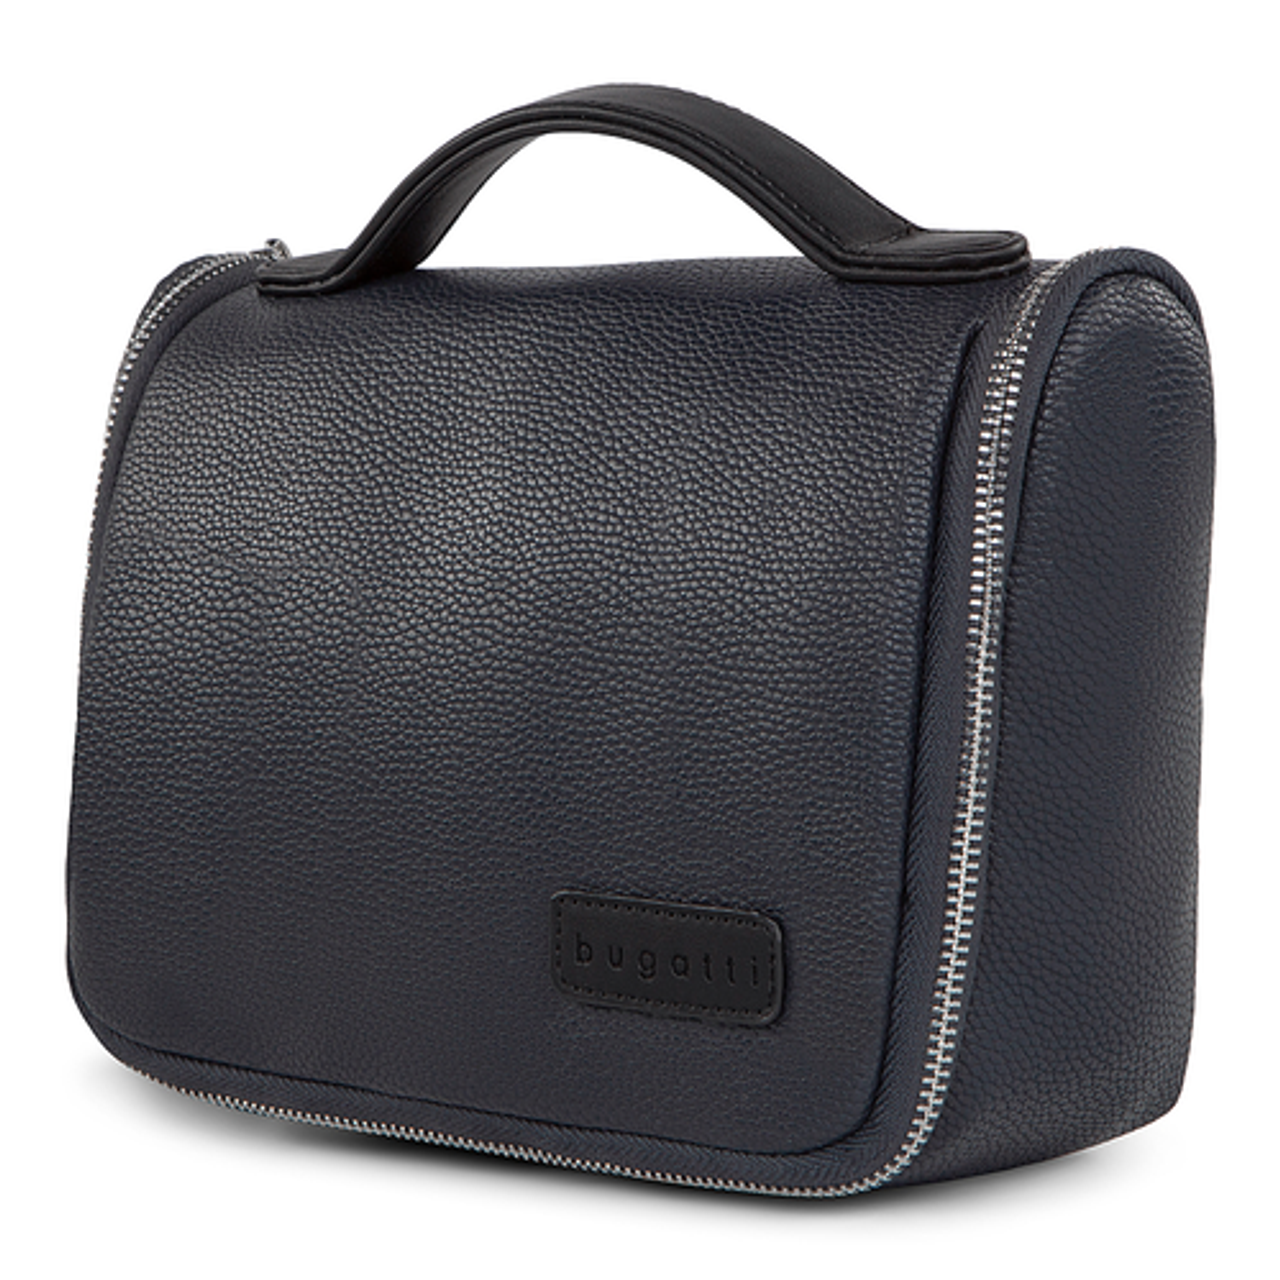 Bugatti - Contrast collection - Toiletry bag - Navy